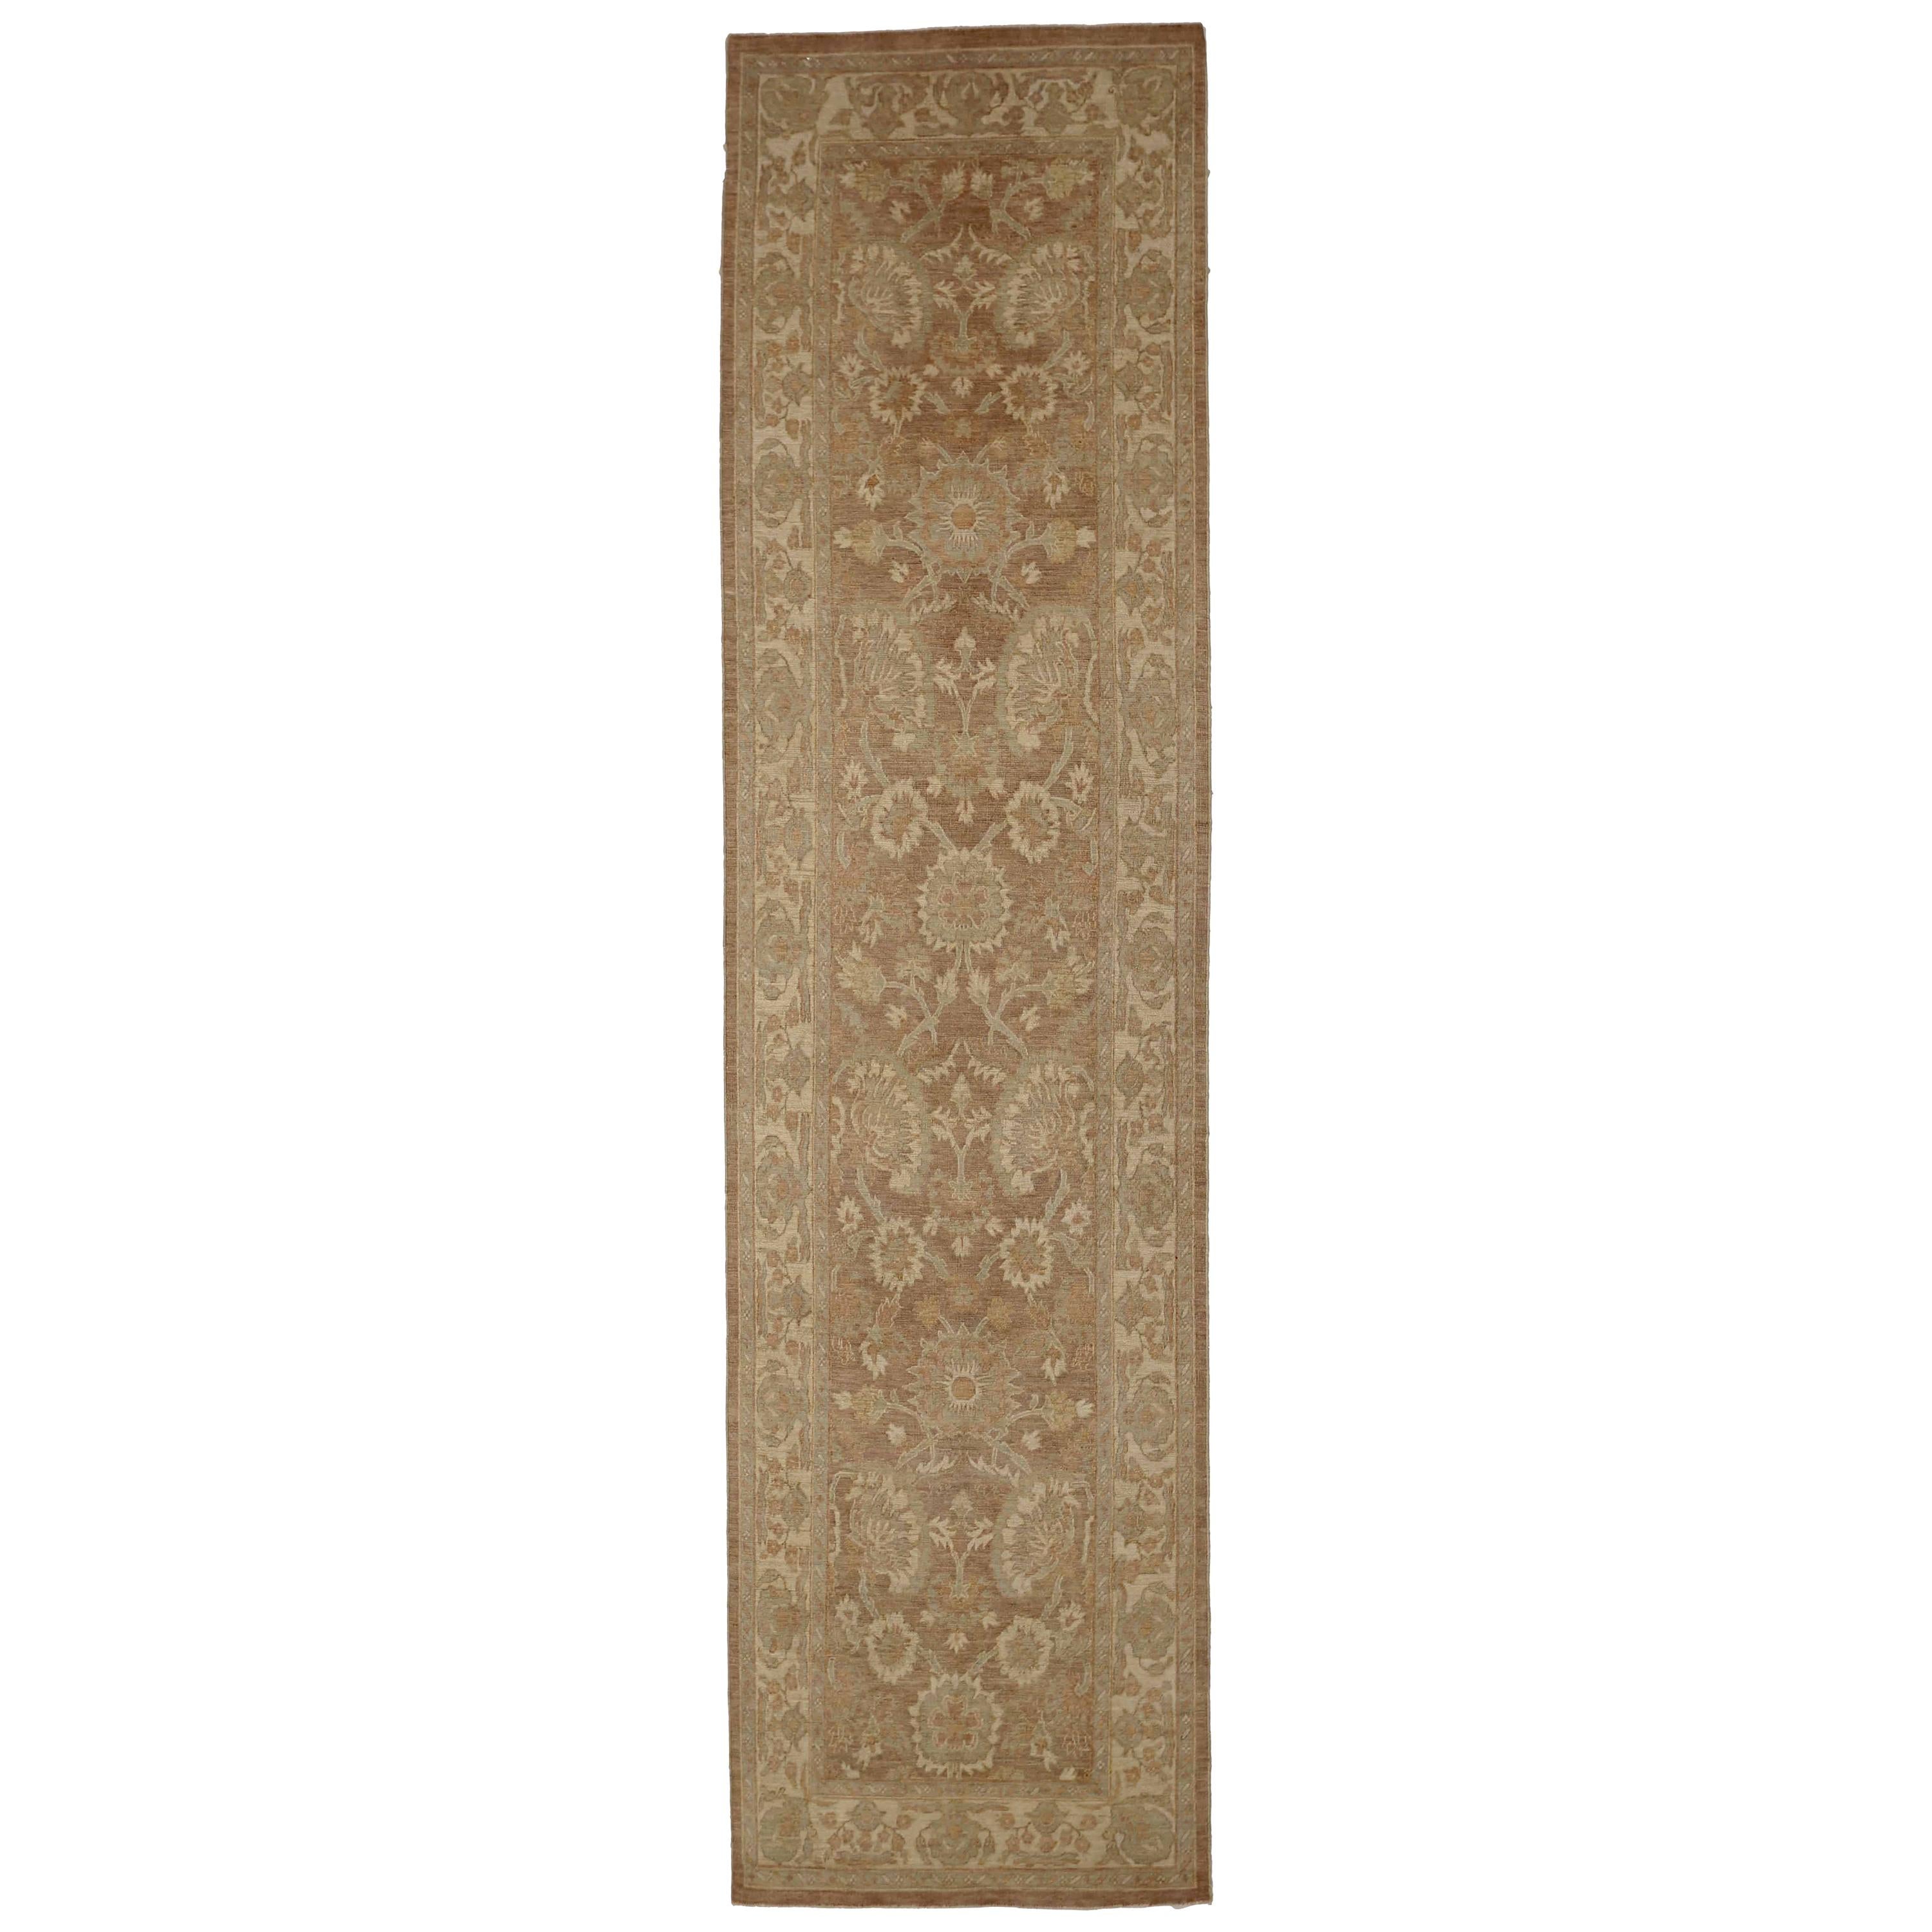 New Tabriz Design Afghan Runner Rug with 17th-Century Antique Look  For Sale